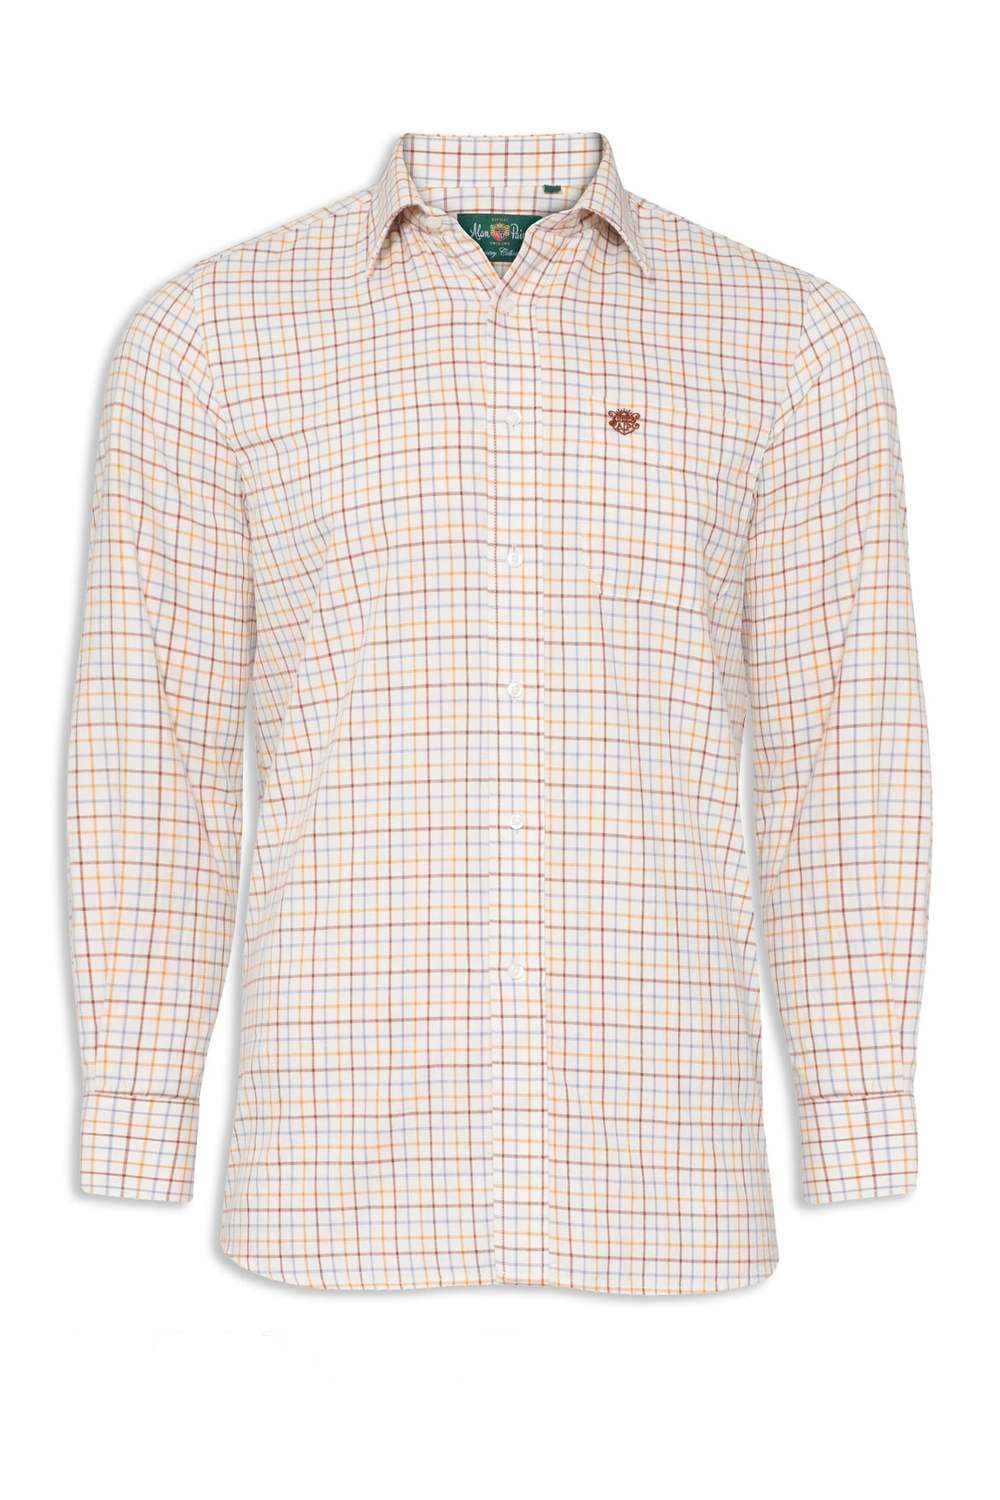 Alan Paine Ilkley Kids Tattersall Shirt in Country Check Brown 